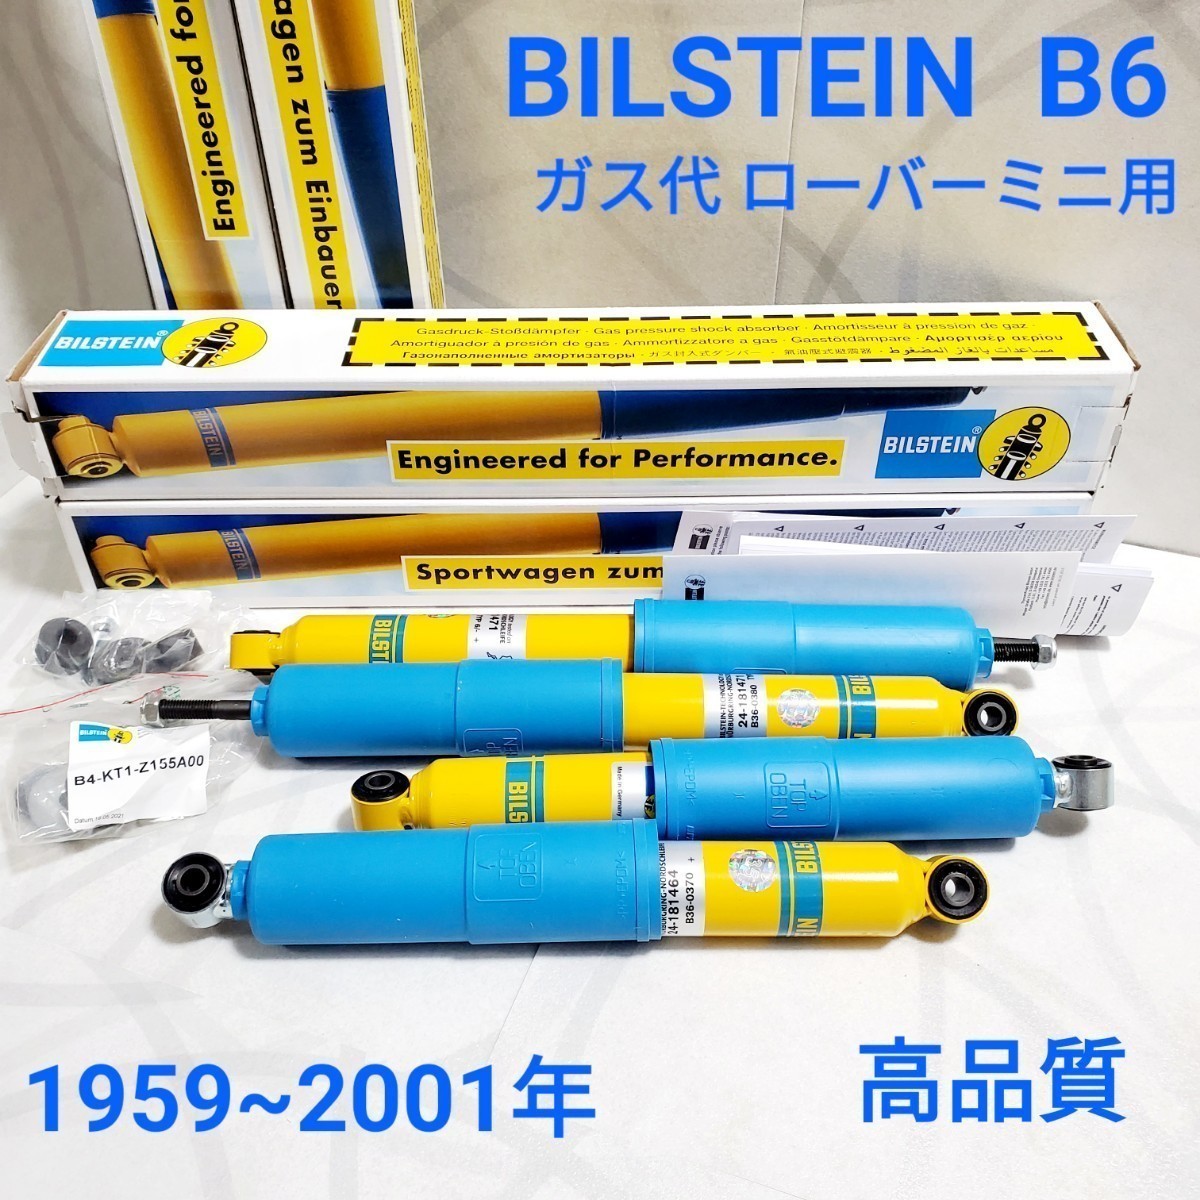  Rover Mini shock absorber BILSTEIN Bilstein B6 4ps.@/ for 1 vehicle set Germany GERMANY Classic Mini shock high quality new goods 